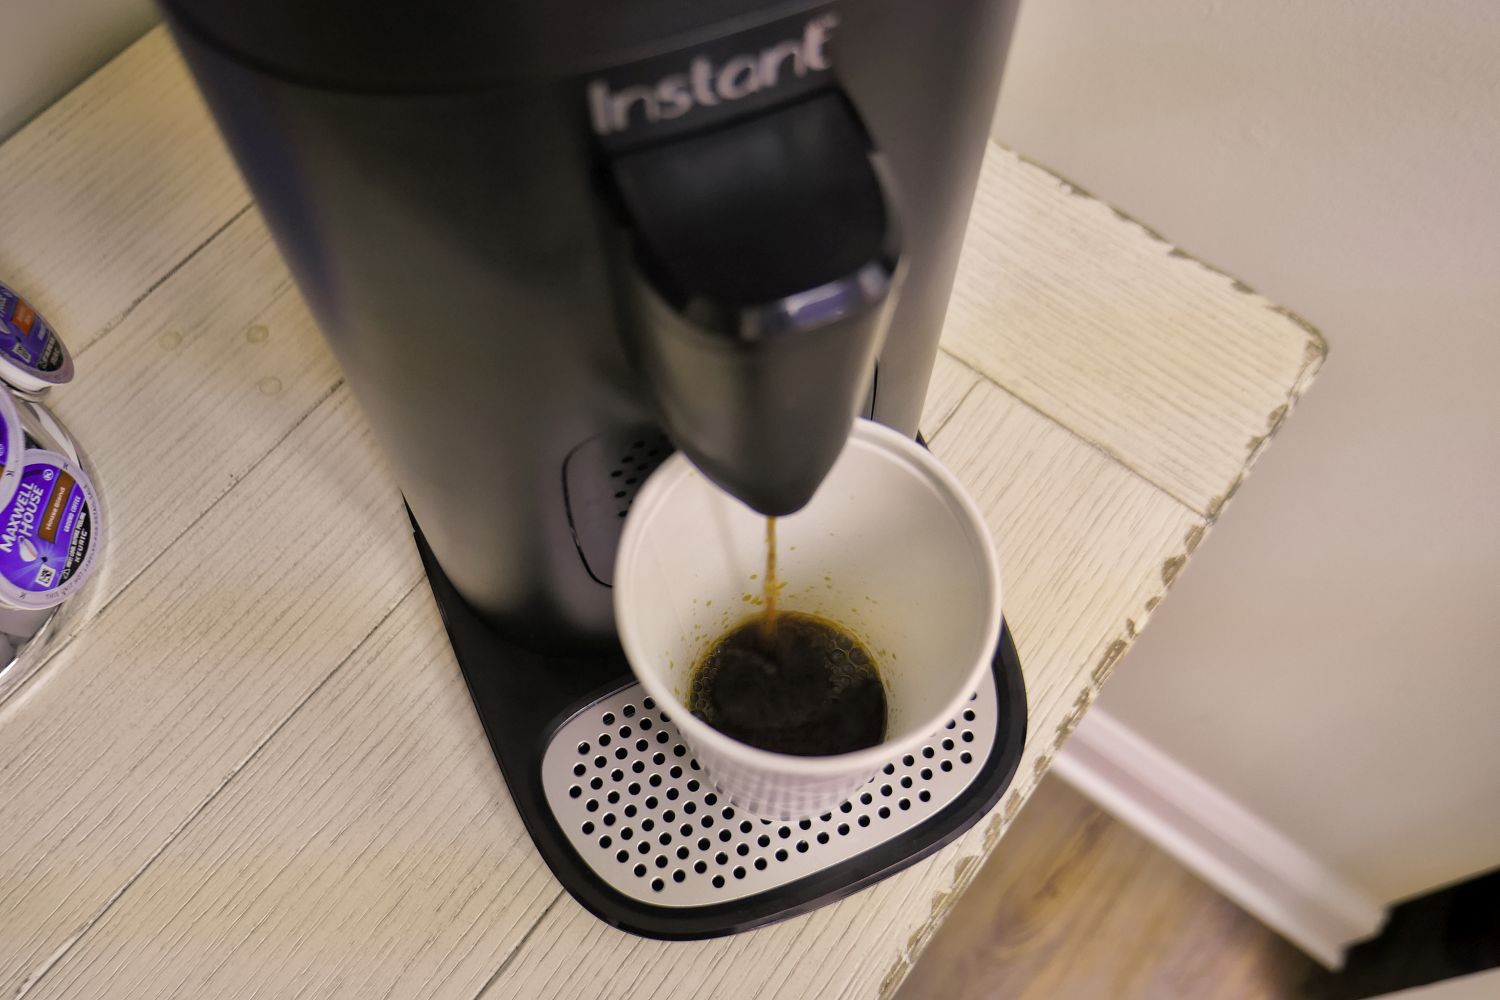 Instant Multi-Pod 68 MB Coffee Maker Review - Consumer Reports